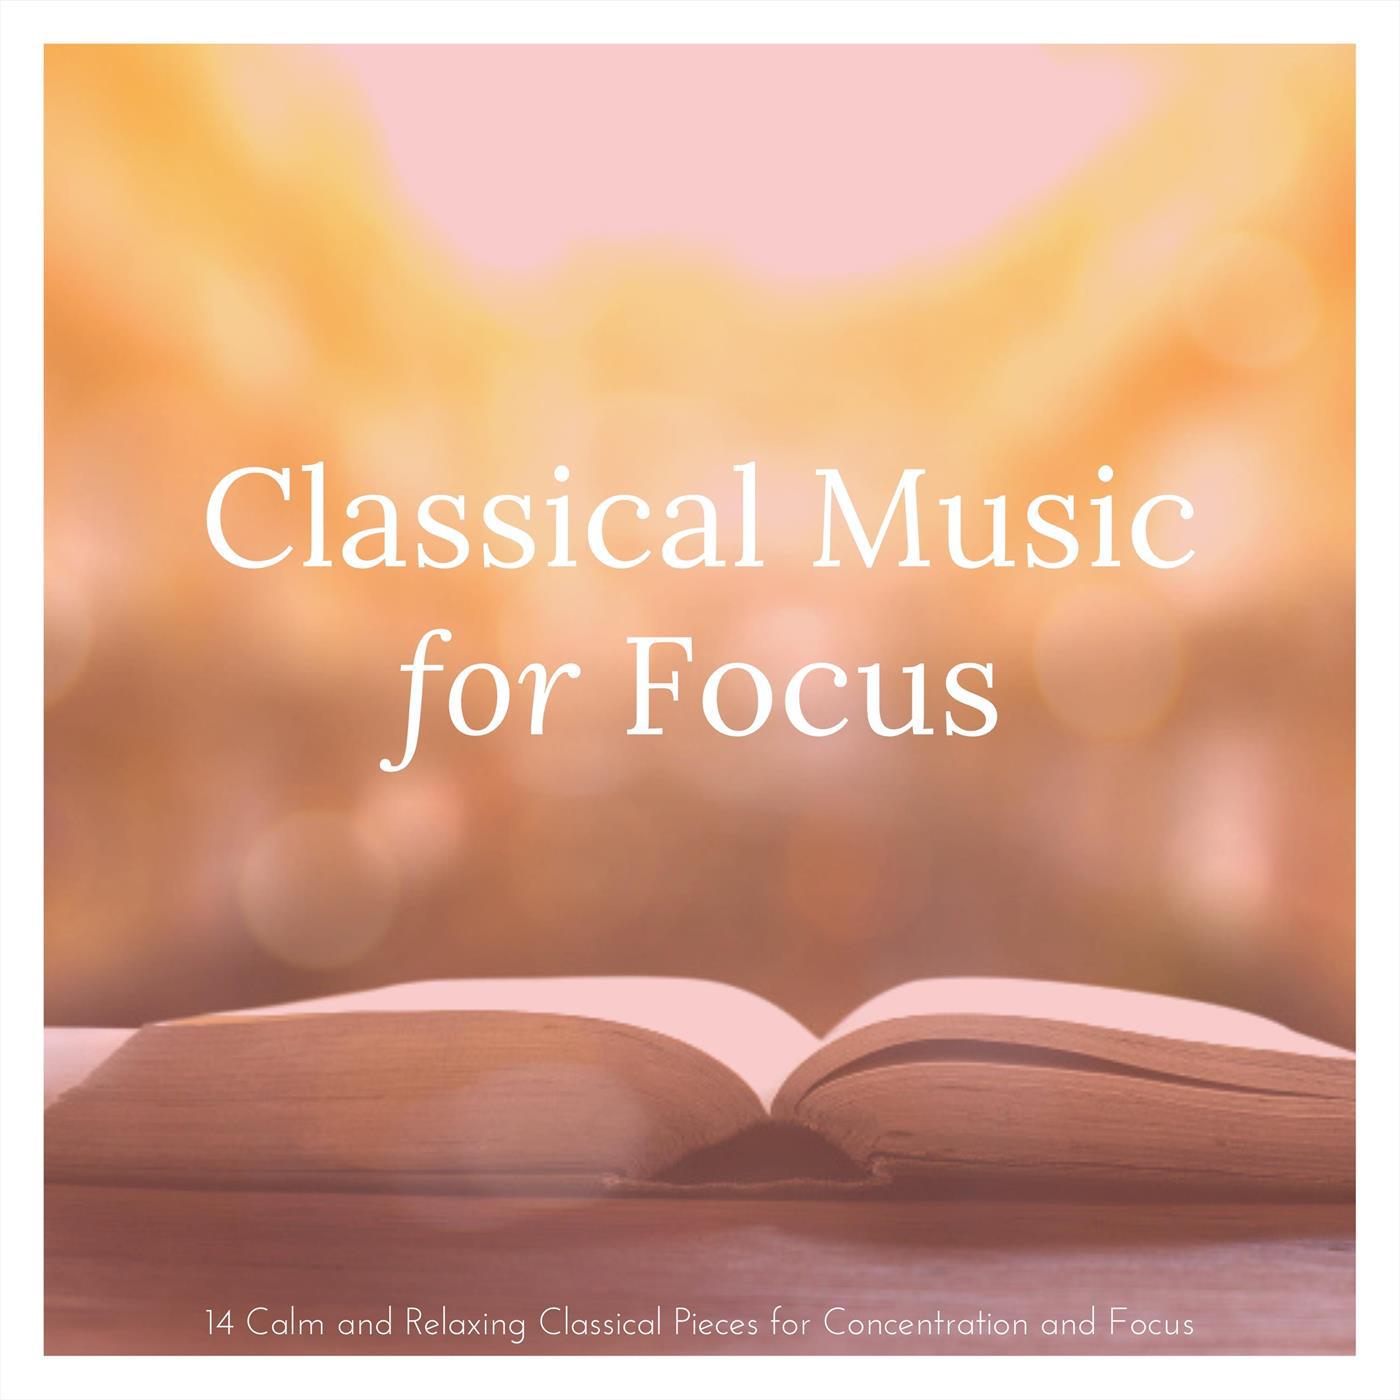 Classical Music for Focus: 14 Calm and Relaxing Classical Pieces for Concentration and Focus